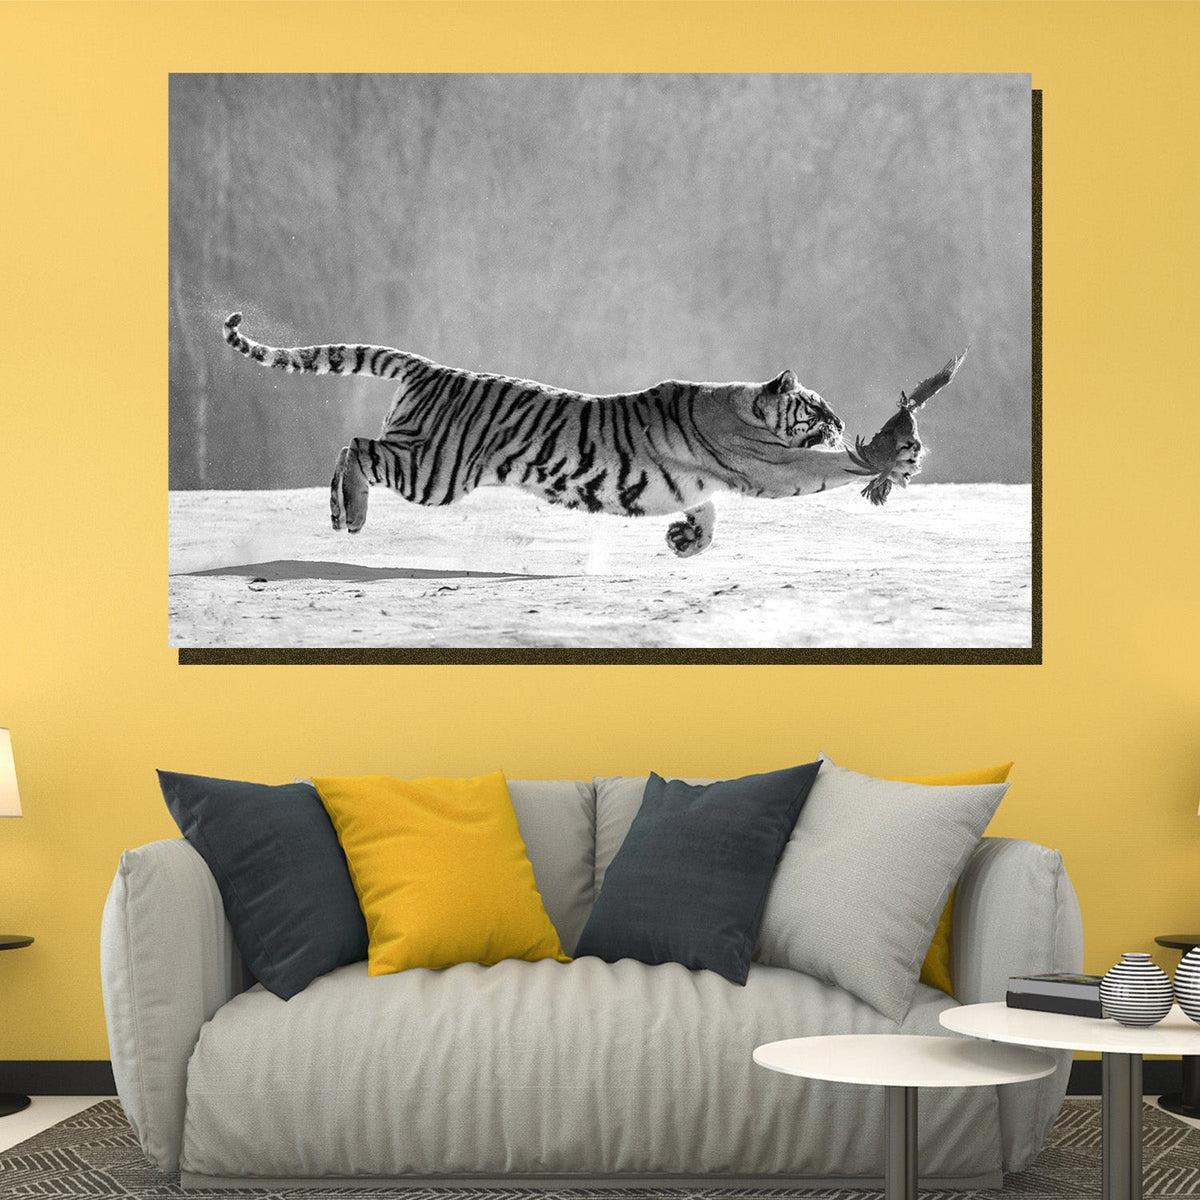 https://cdn.shopify.com/s/files/1/0387/9986/8044/products/SiberianTigerCanvasArtprintStretched-3.jpg